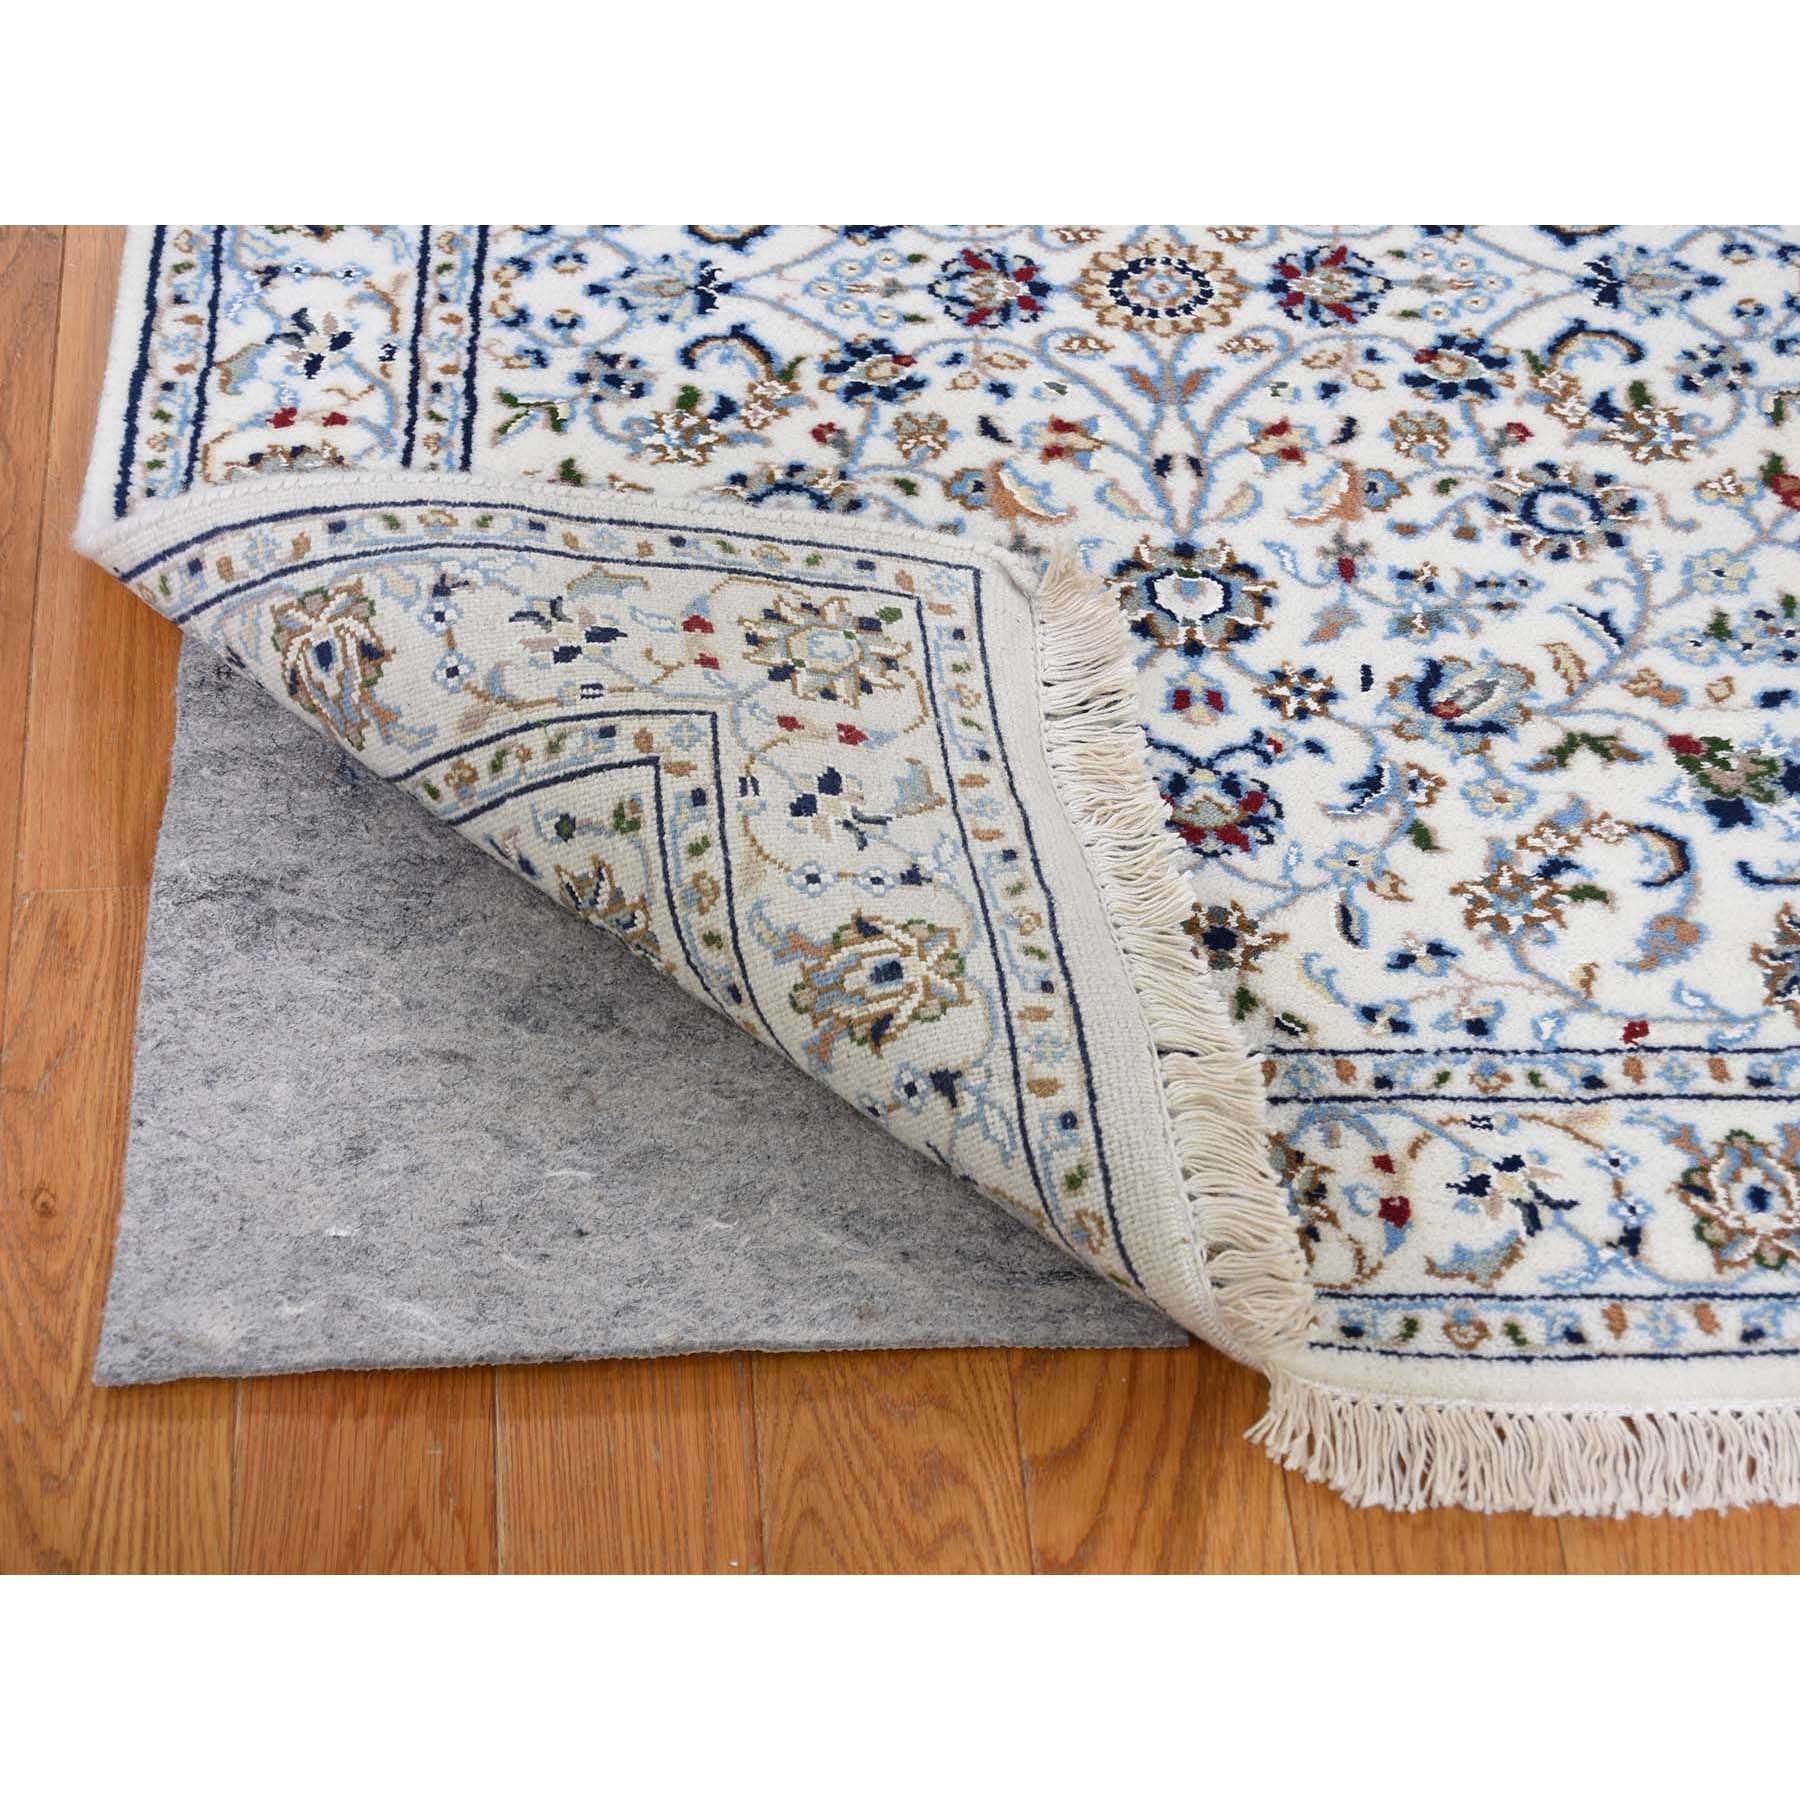 2-9 x6-2  Ivory Runner Nain Wool And Silk All Over Design 250 KPSI Hand Knotted Oriental Rug 